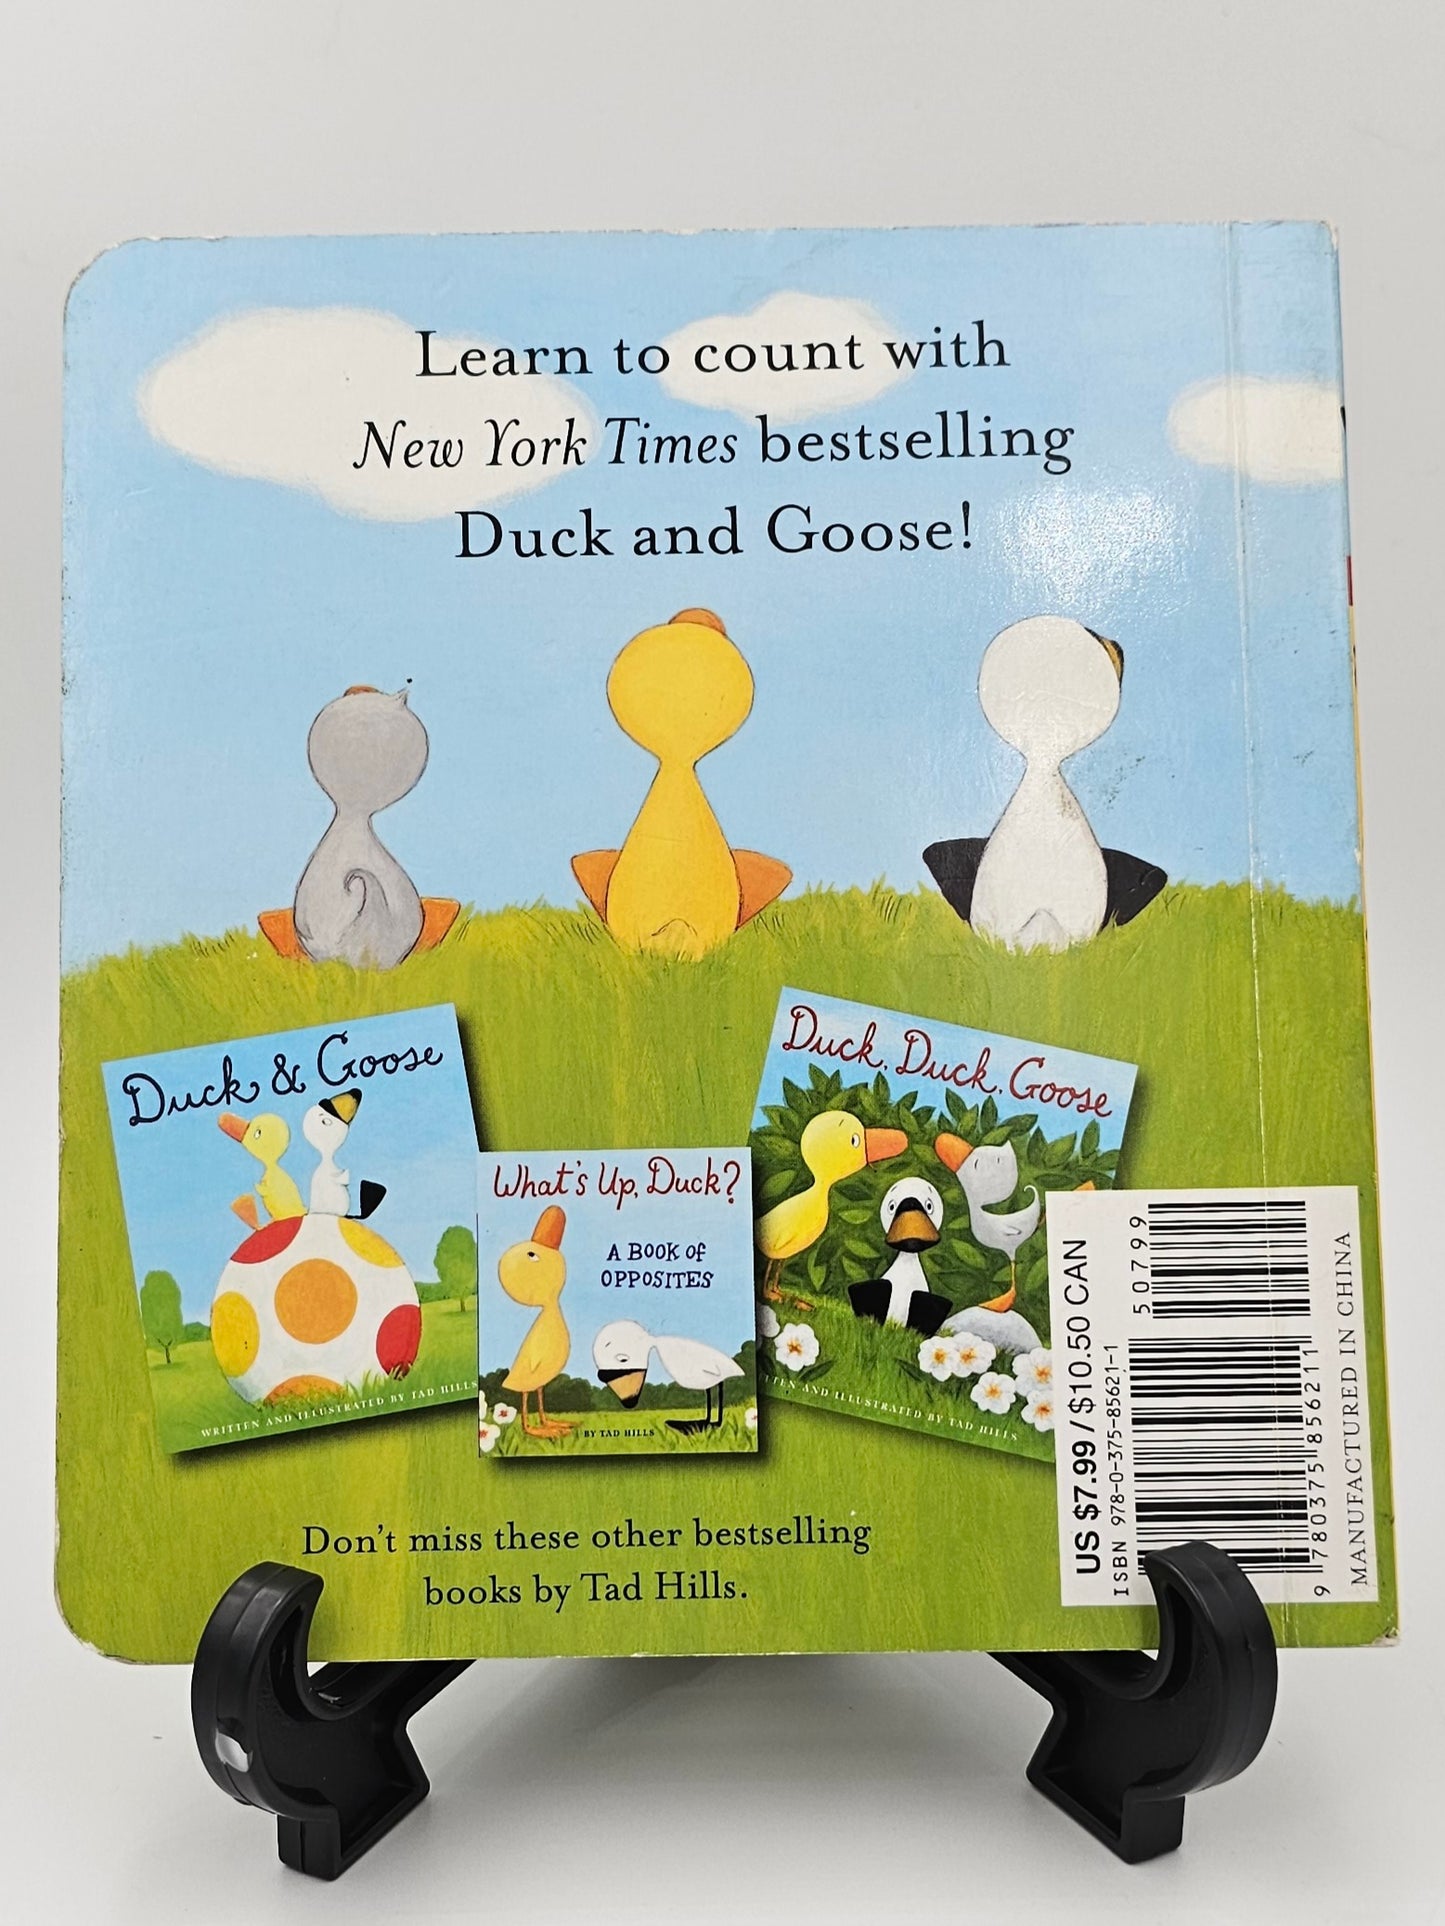 Duck and Goose 1, 2, 3 by Tad Hills (Duck & Goose Series)